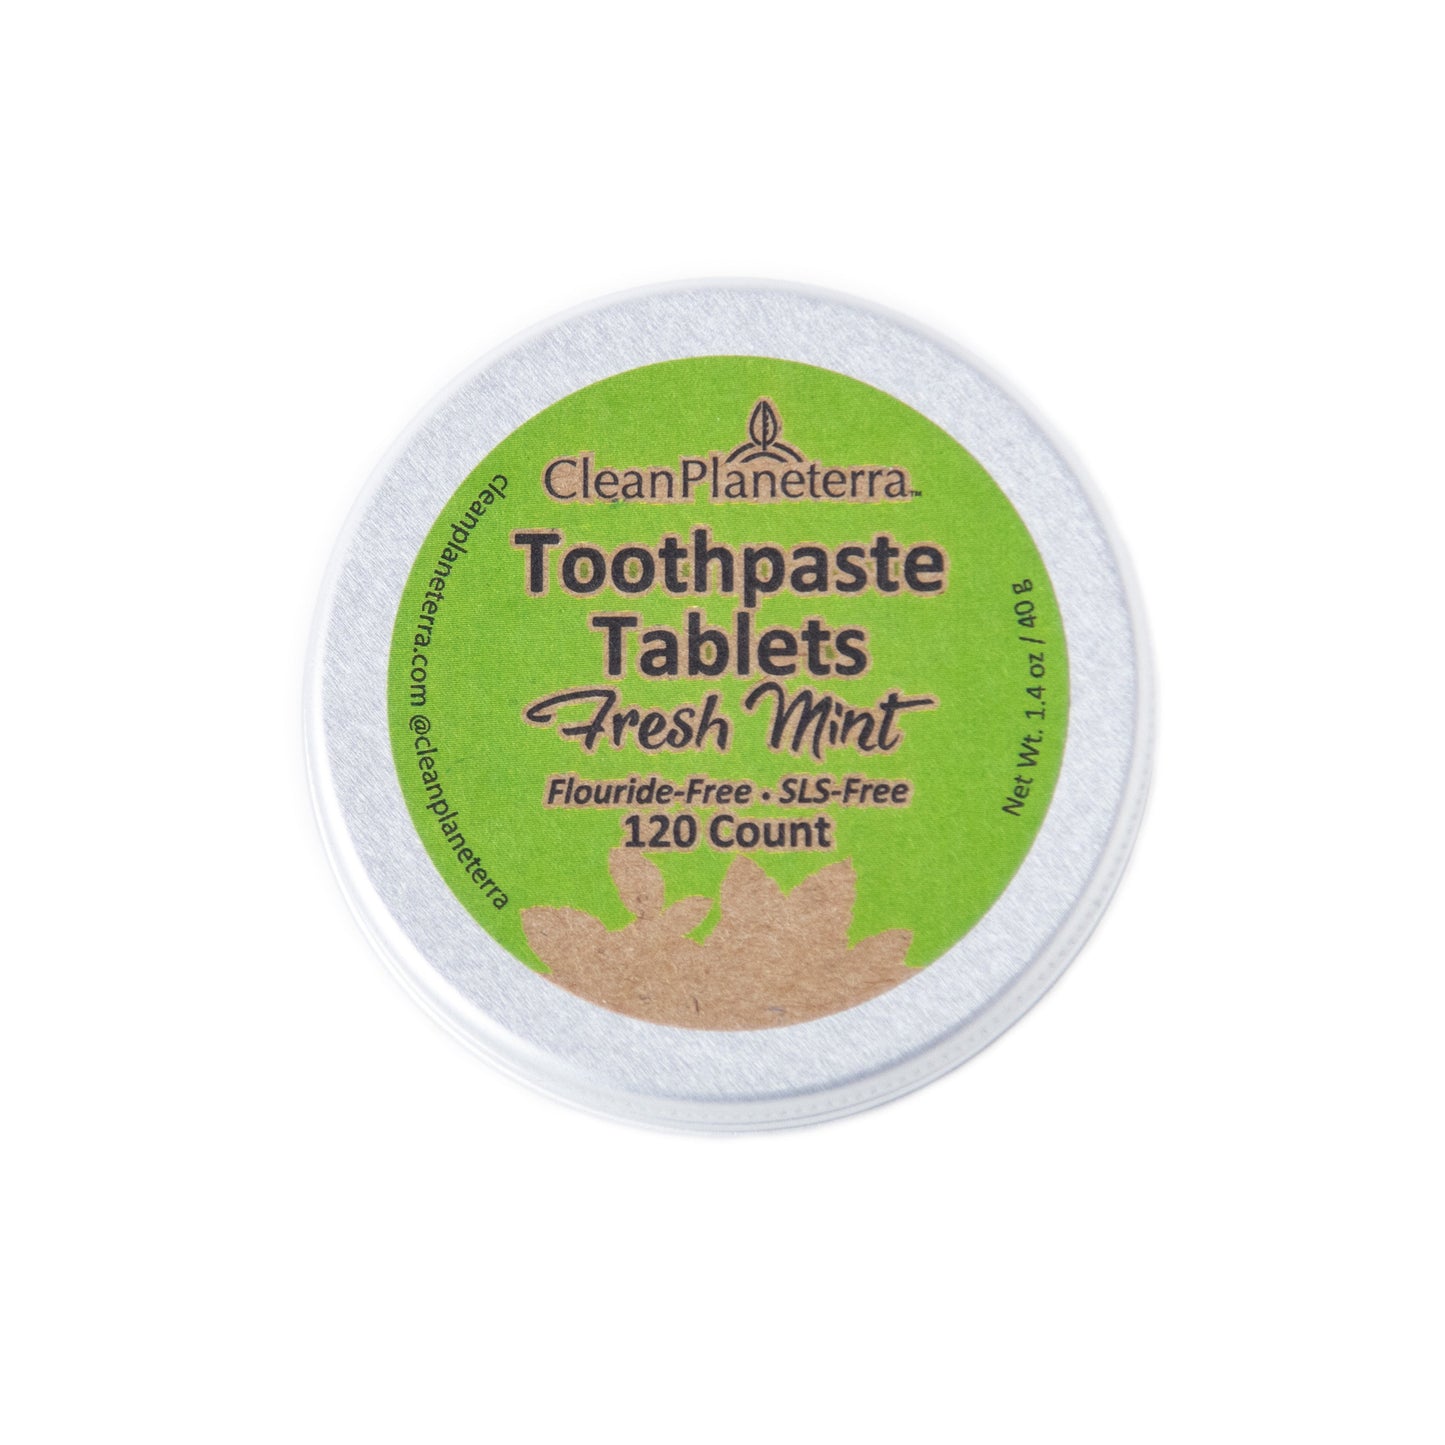 Toothpaste Tablets Fresh Mint